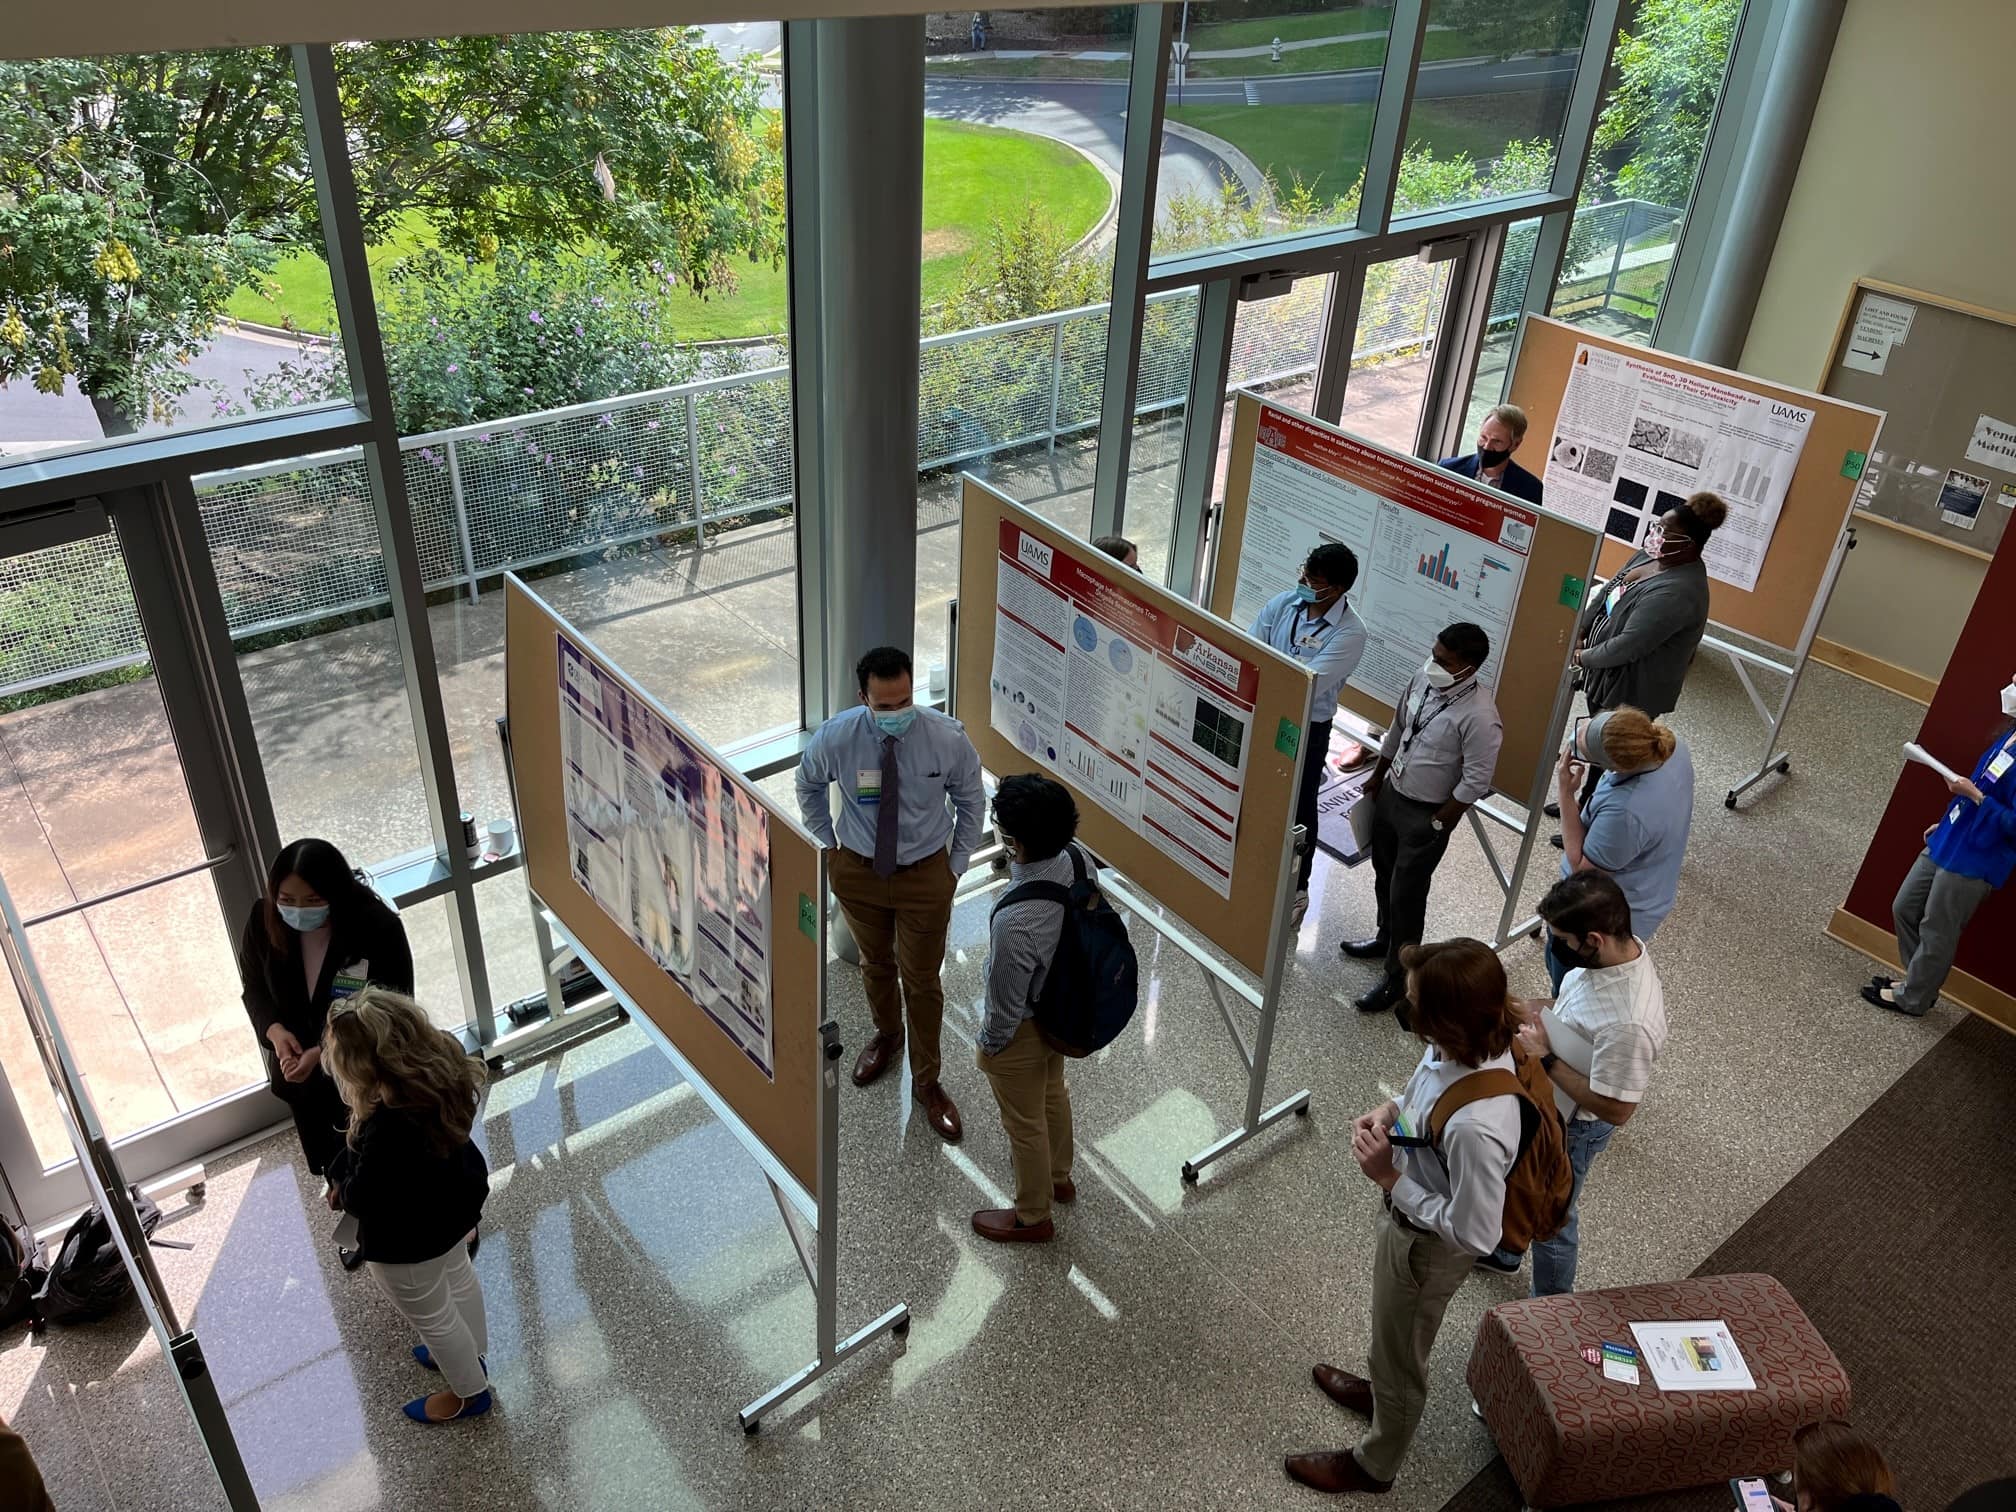 UAMS Division of Research and Innovation Engages Researchers at Orientation  and Administrative Showcase